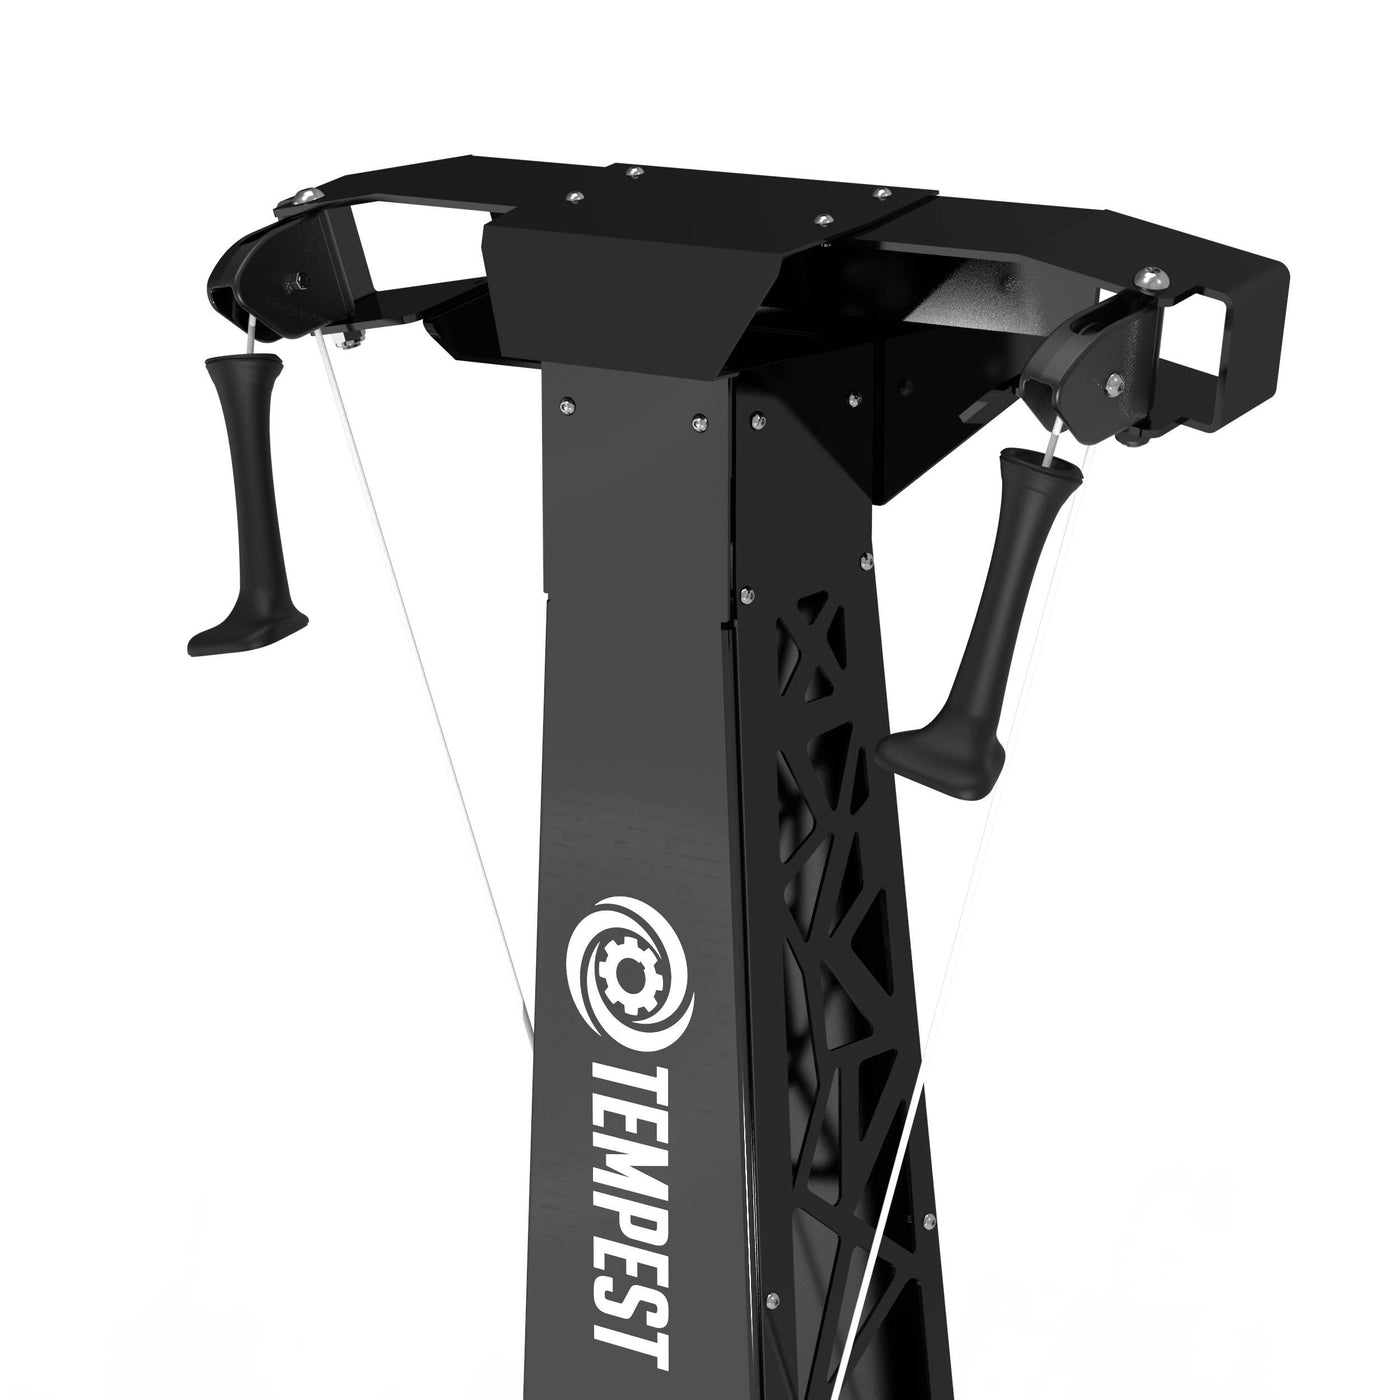 Tempest Ski Erg + Stand - Industrial Athletic